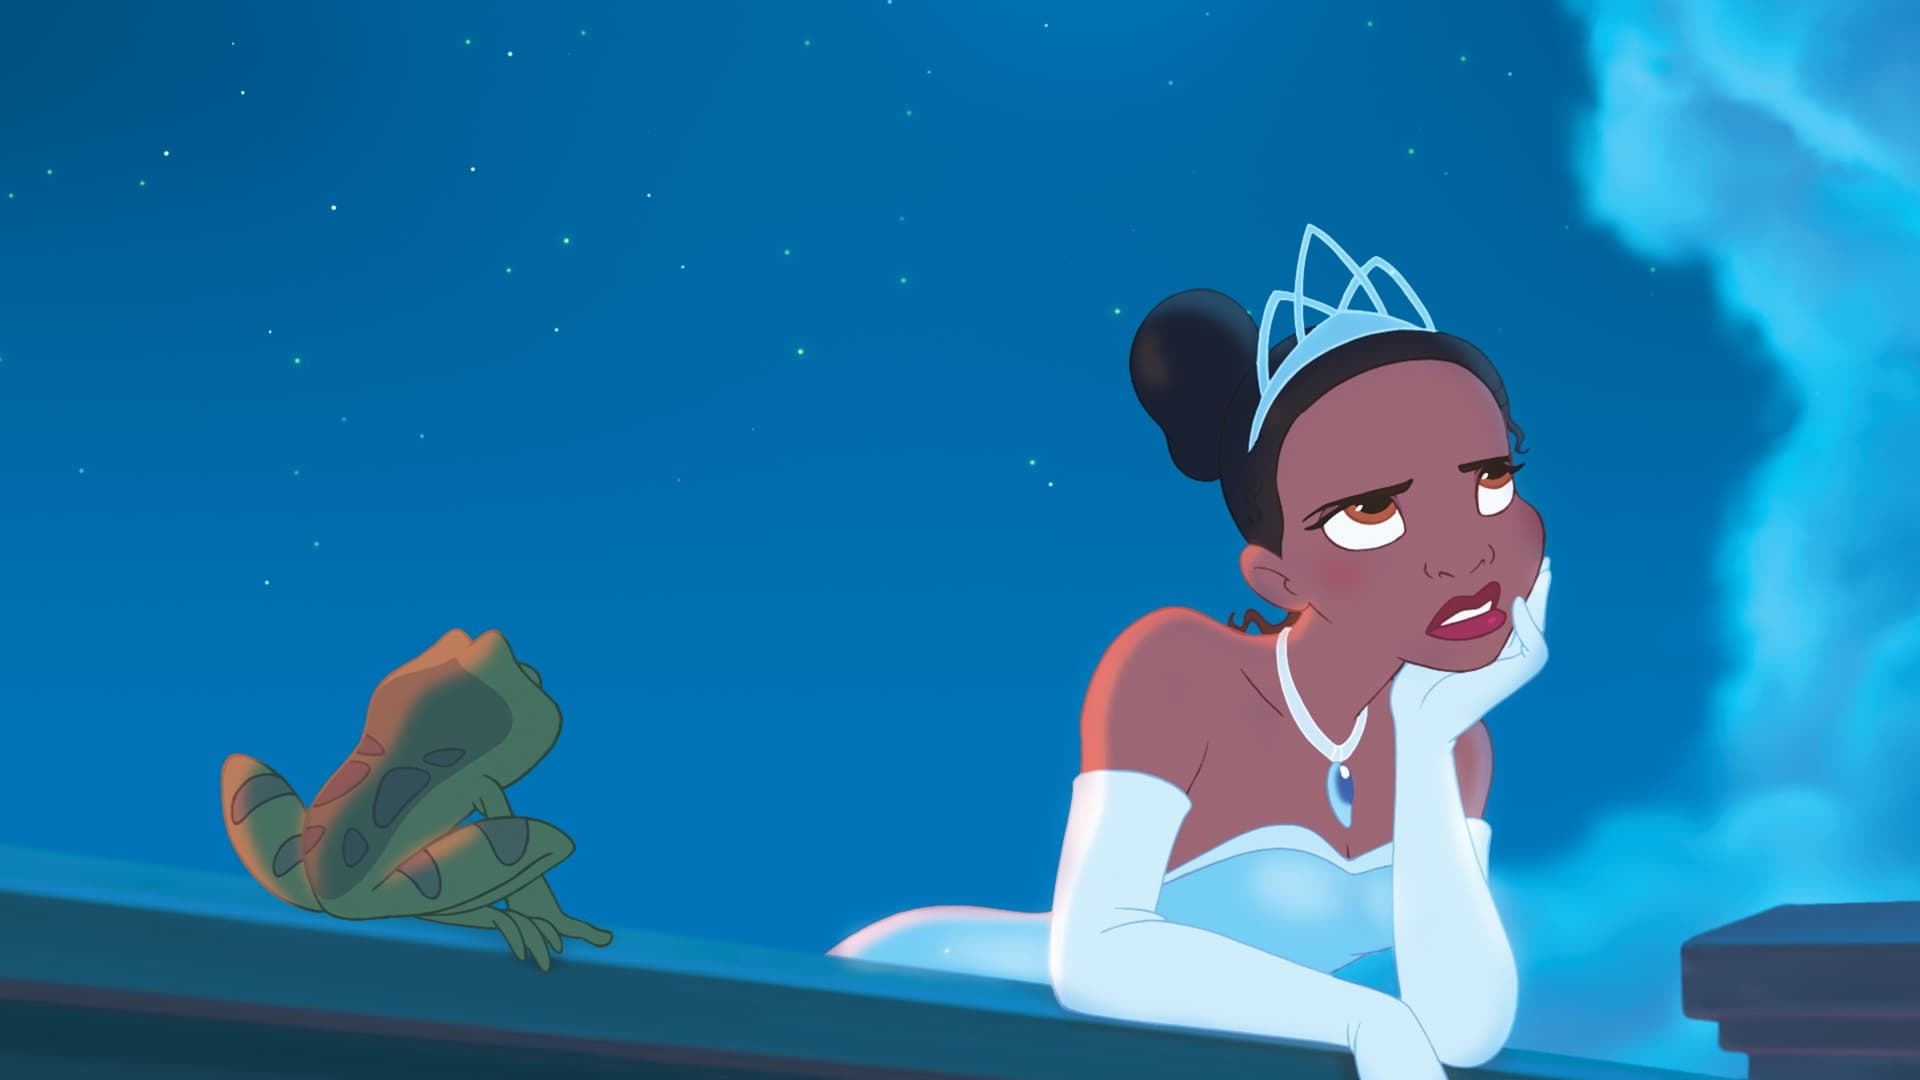 Princess and the Frog, 2009 movie review, Disney animated film, Magical tale, 1920x1080 Full HD Desktop